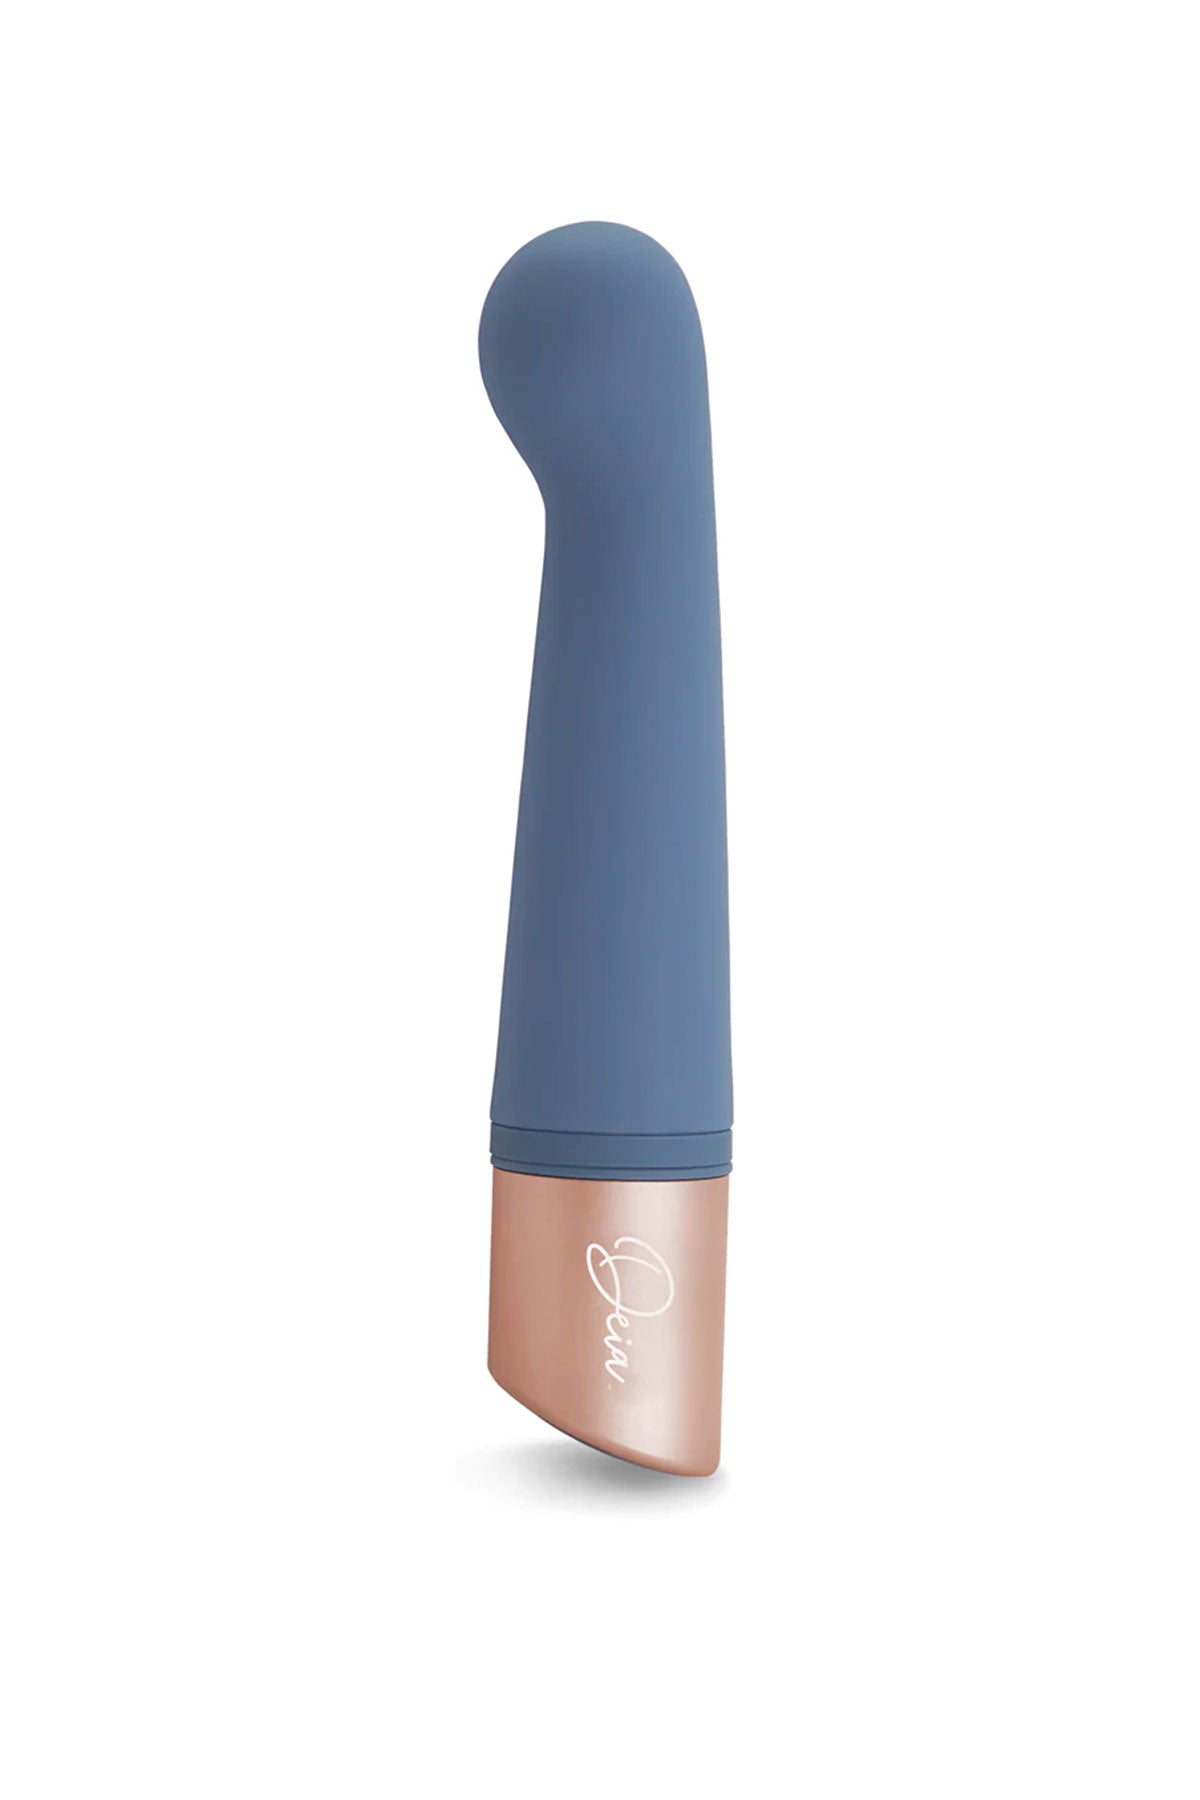 The Couple | Two-in-One Massager